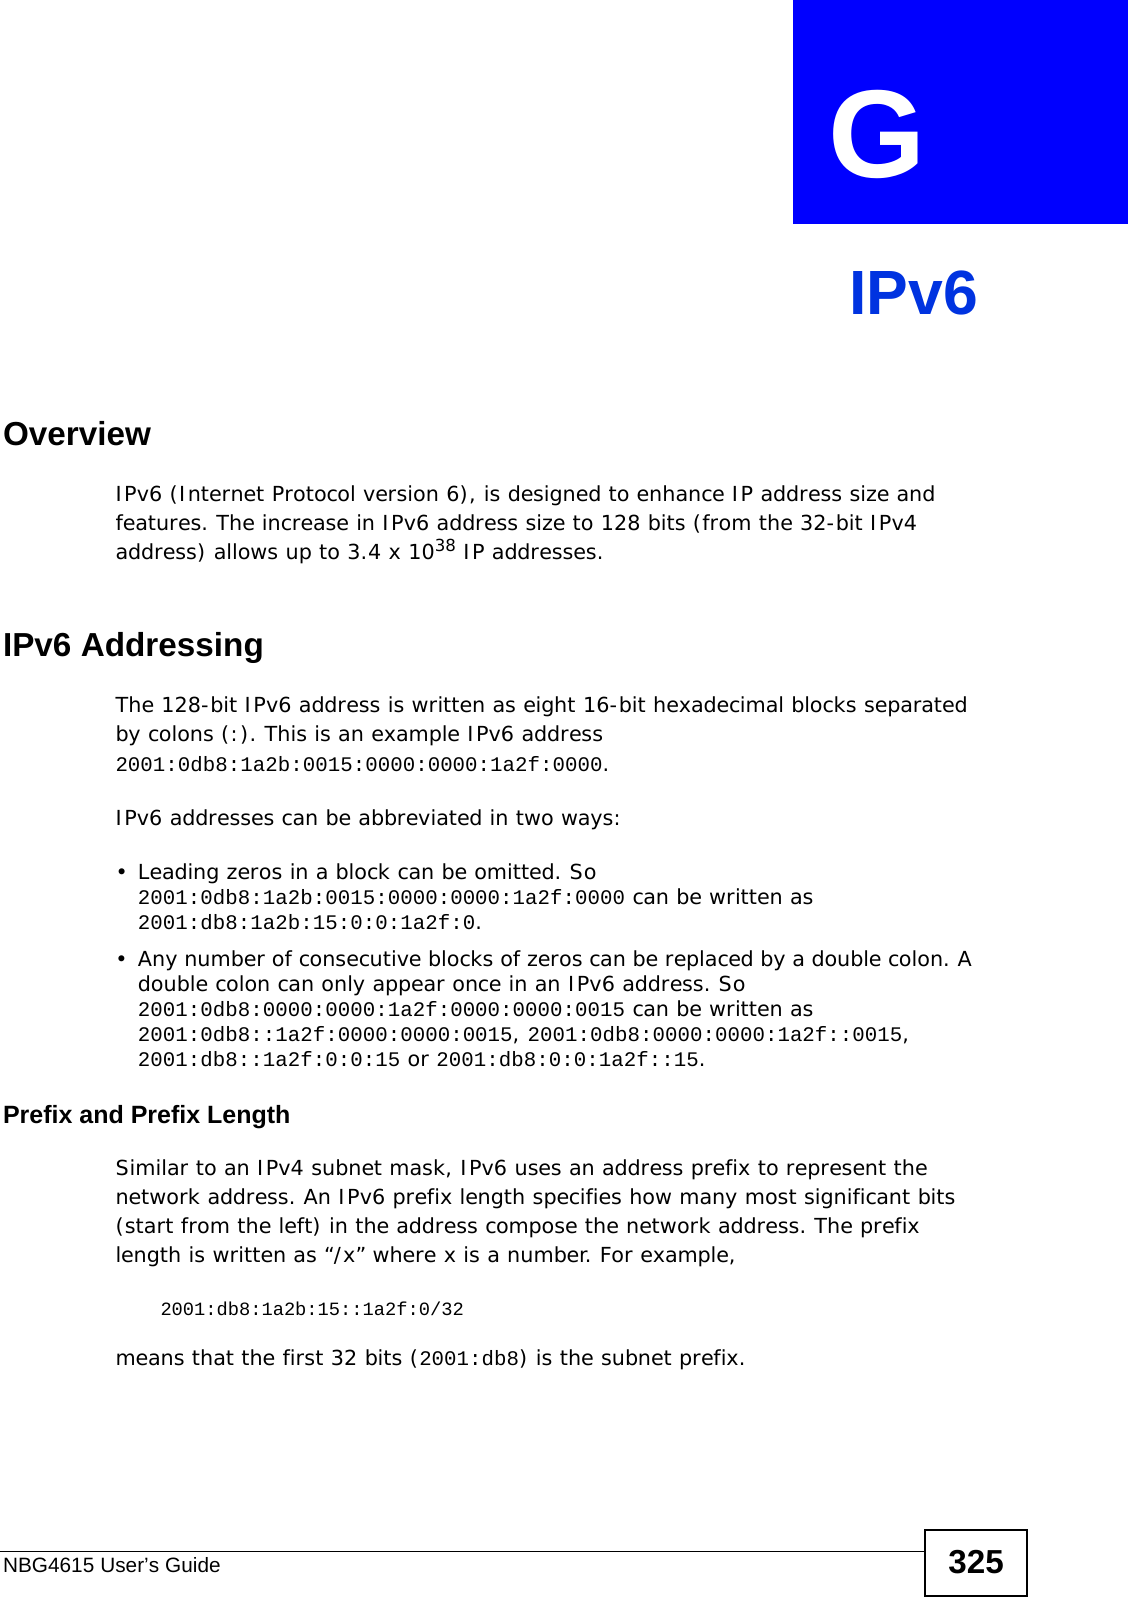 NBG4615 User’s Guide 325APPENDIX  G IPv6OverviewIPv6 (Internet Protocol version 6), is designed to enhance IP address size and features. The increase in IPv6 address size to 128 bits (from the 32-bit IPv4 address) allows up to 3.4 x 1038 IP addresses. IPv6 AddressingThe 128-bit IPv6 address is written as eight 16-bit hexadecimal blocks separated by colons (:). This is an example IPv6 address 2001:0db8:1a2b:0015:0000:0000:1a2f:0000. IPv6 addresses can be abbreviated in two ways:• Leading zeros in a block can be omitted. So 2001:0db8:1a2b:0015:0000:0000:1a2f:0000 can be written as 2001:db8:1a2b:15:0:0:1a2f:0. • Any number of consecutive blocks of zeros can be replaced by a double colon. A double colon can only appear once in an IPv6 address. So 2001:0db8:0000:0000:1a2f:0000:0000:0015 can be written as 2001:0db8::1a2f:0000:0000:0015, 2001:0db8:0000:0000:1a2f::0015, 2001:db8::1a2f:0:0:15 or 2001:db8:0:0:1a2f::15.Prefix and Prefix LengthSimilar to an IPv4 subnet mask, IPv6 uses an address prefix to represent the network address. An IPv6 prefix length specifies how many most significant bits (start from the left) in the address compose the network address. The prefix length is written as “/x” where x is a number. For example, 2001:db8:1a2b:15::1a2f:0/32means that the first 32 bits (2001:db8) is the subnet prefix. 